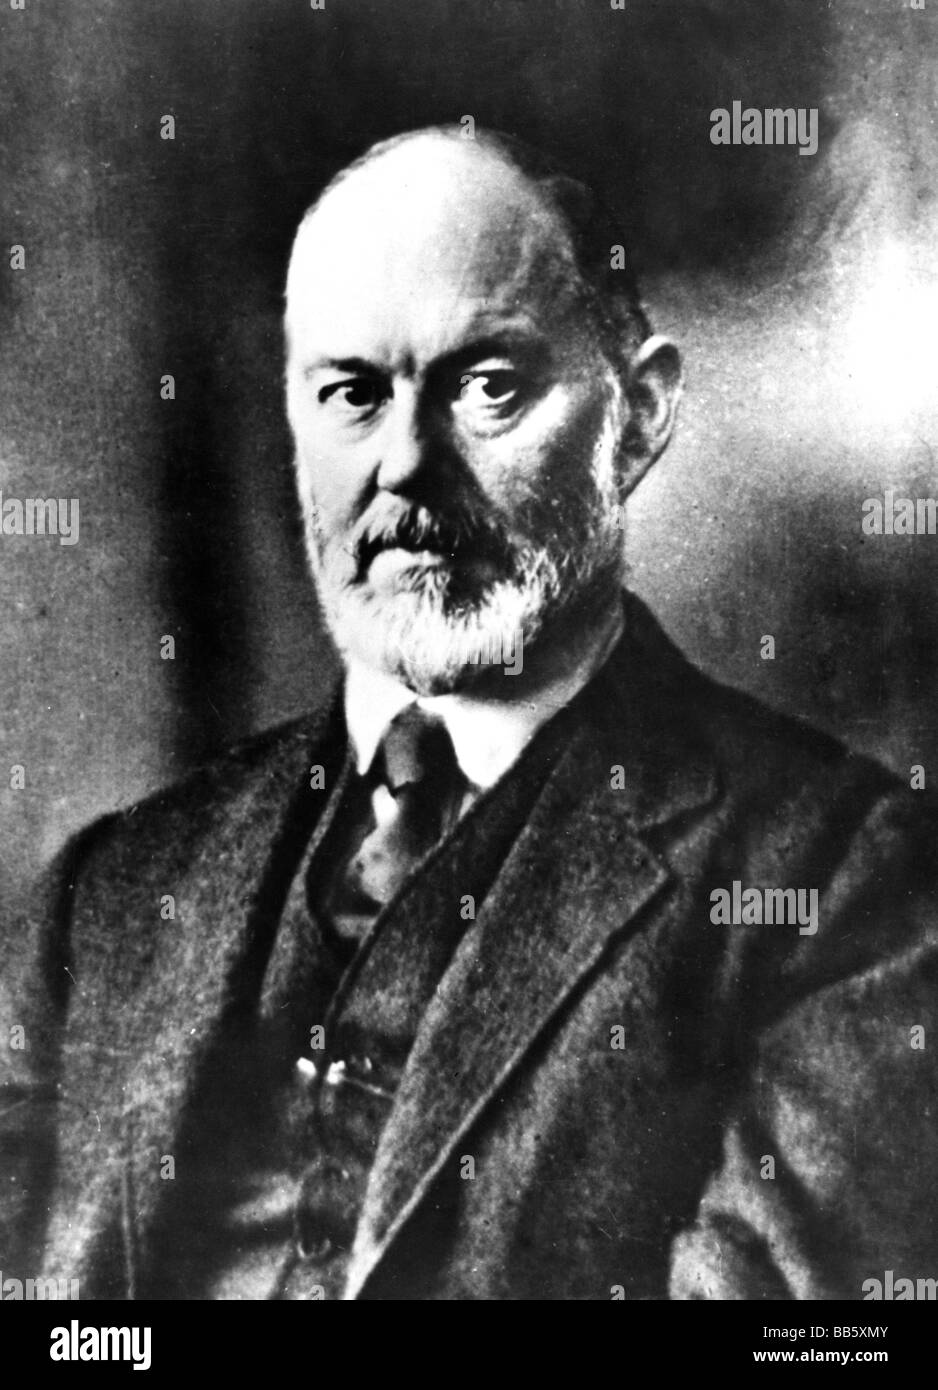 Frederick Henry Royce, 27.3.1863 - 22.4.1933, British pioneering car  manufacturer, founded the "Rolls-Royce" company together with Charles  Stewart Rolls, portrait, 1930s Stock Photo - Alamy